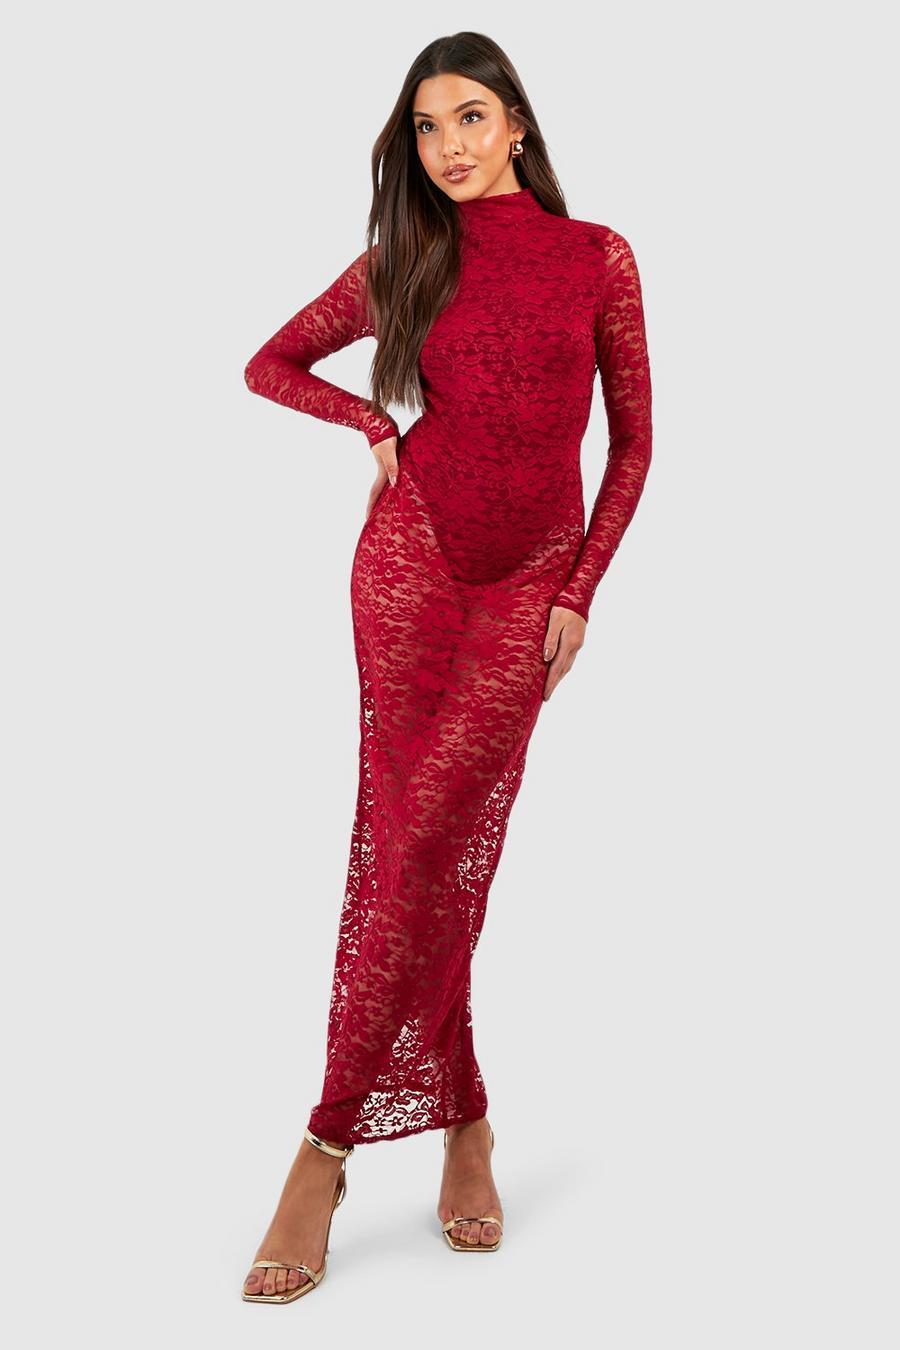 Berry rojo Lace High Neck Backless Maxi Dress